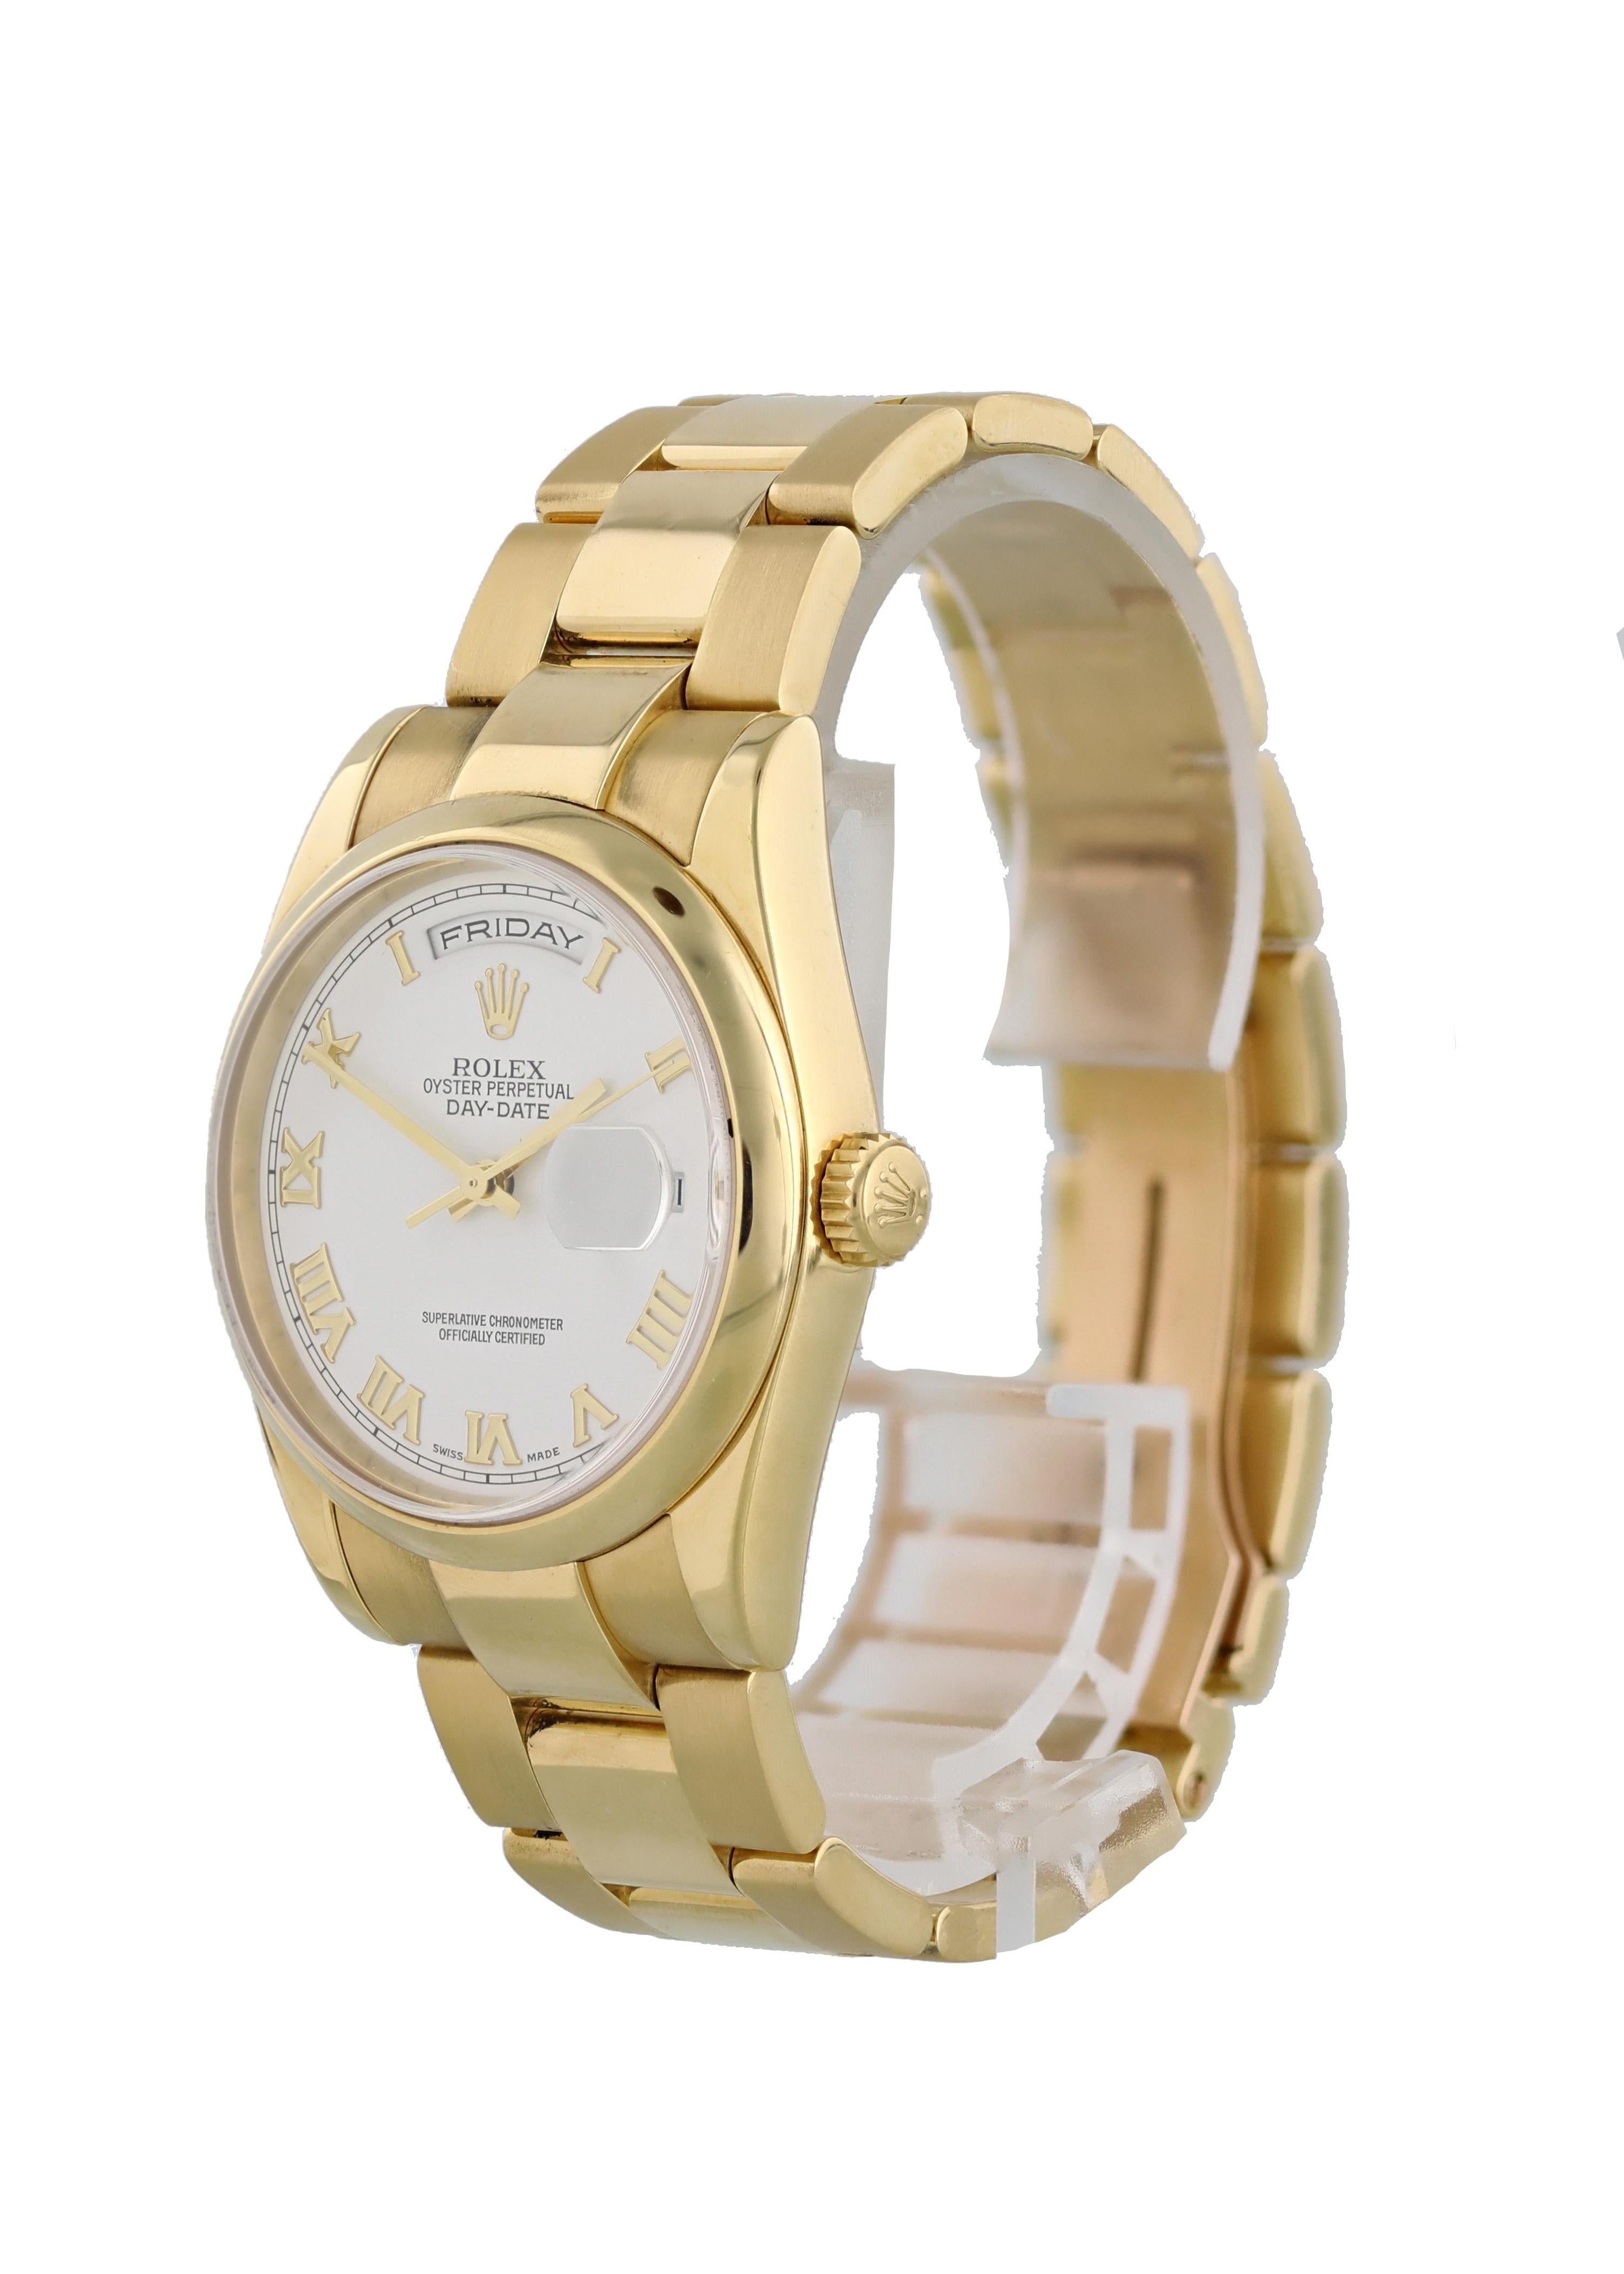 Rolex Day-Date President 118208 18k Yellow Gold Mens Watch. 36mm 18k yellow gold case with smooth bezel. White dial with gold-tone hands and Arabic numeral hour markers. Minute markers on the outer dial. Date display at the 3 o'clock position. 18k